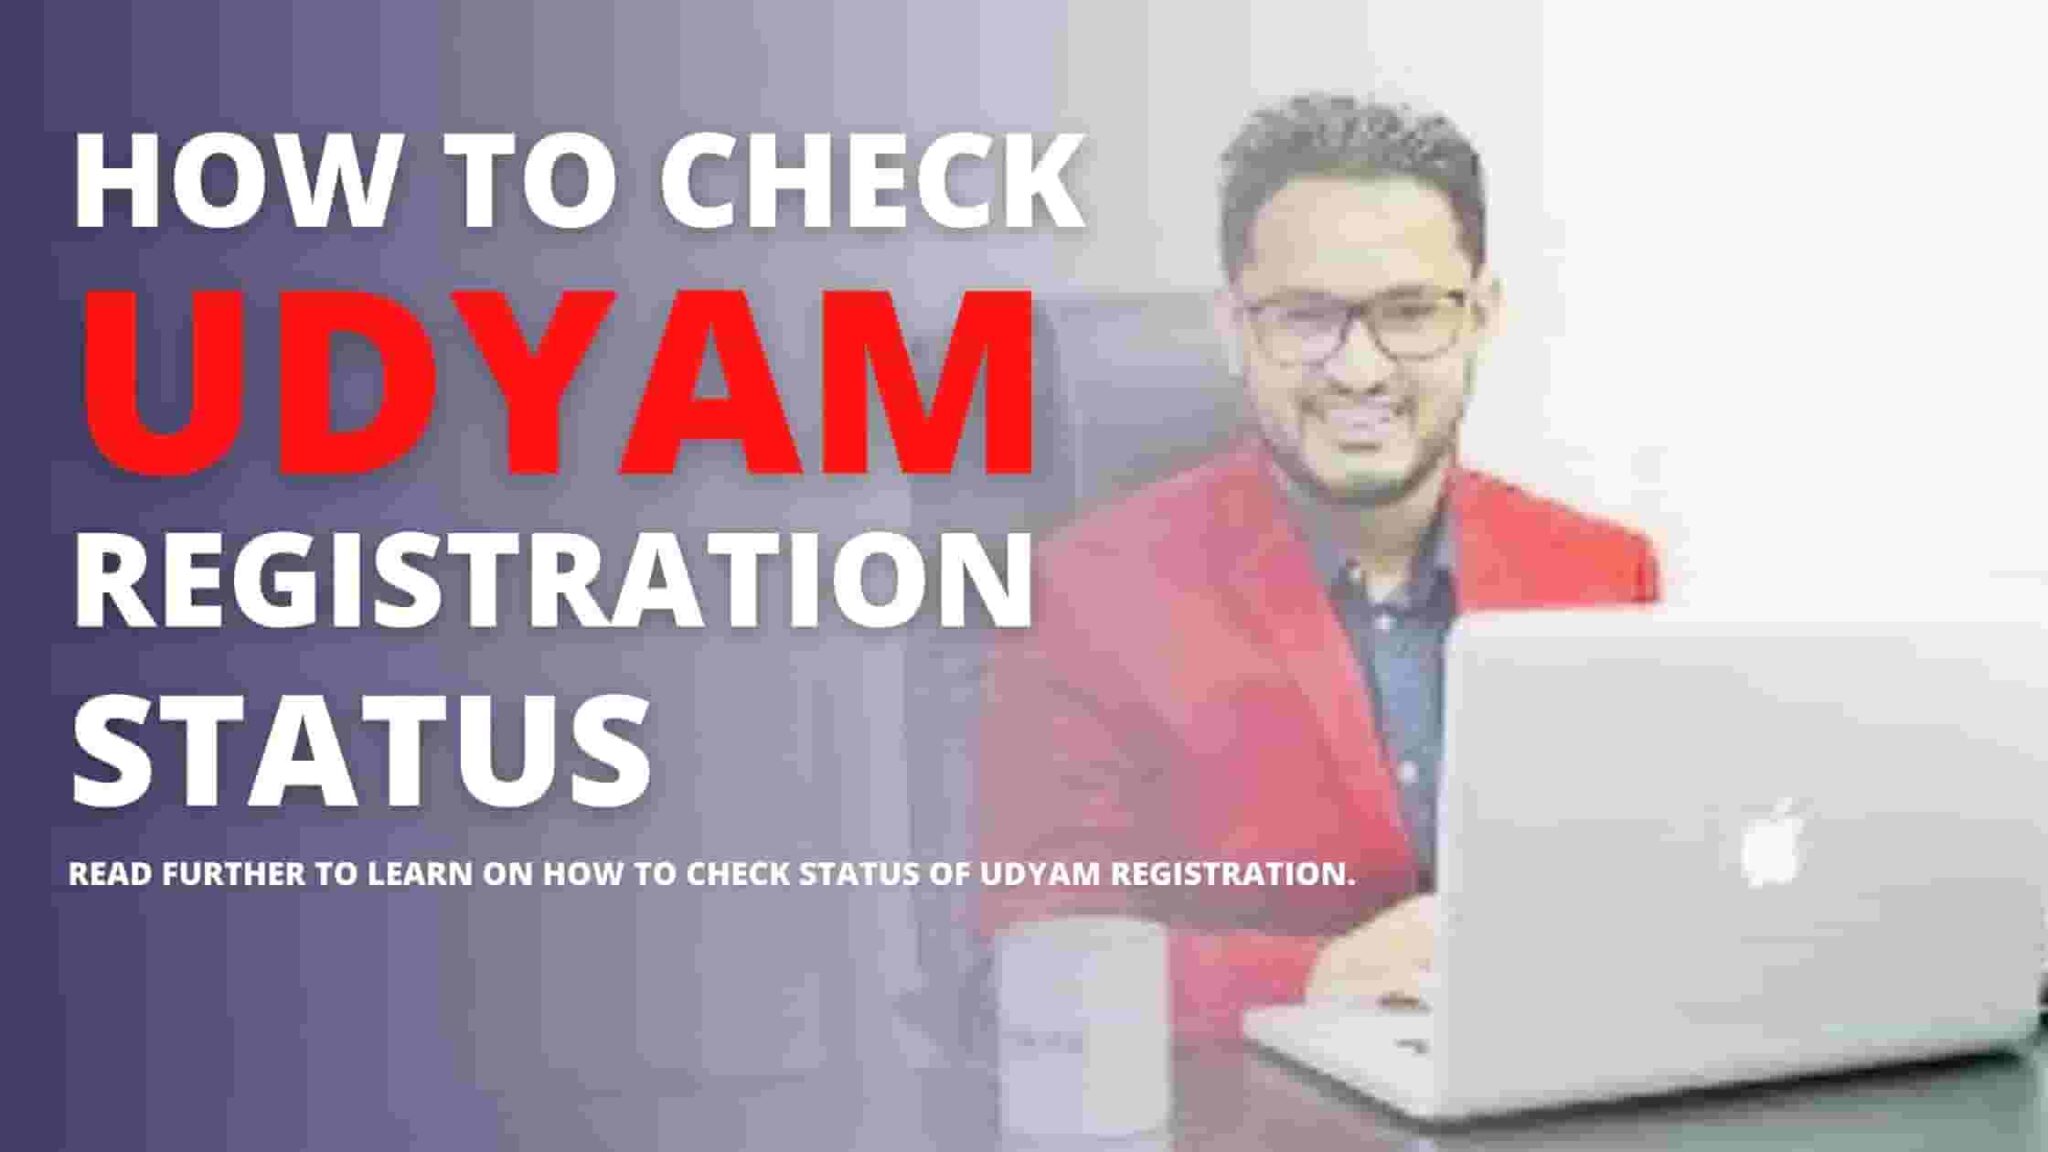 How to Check Udyam Registration Status